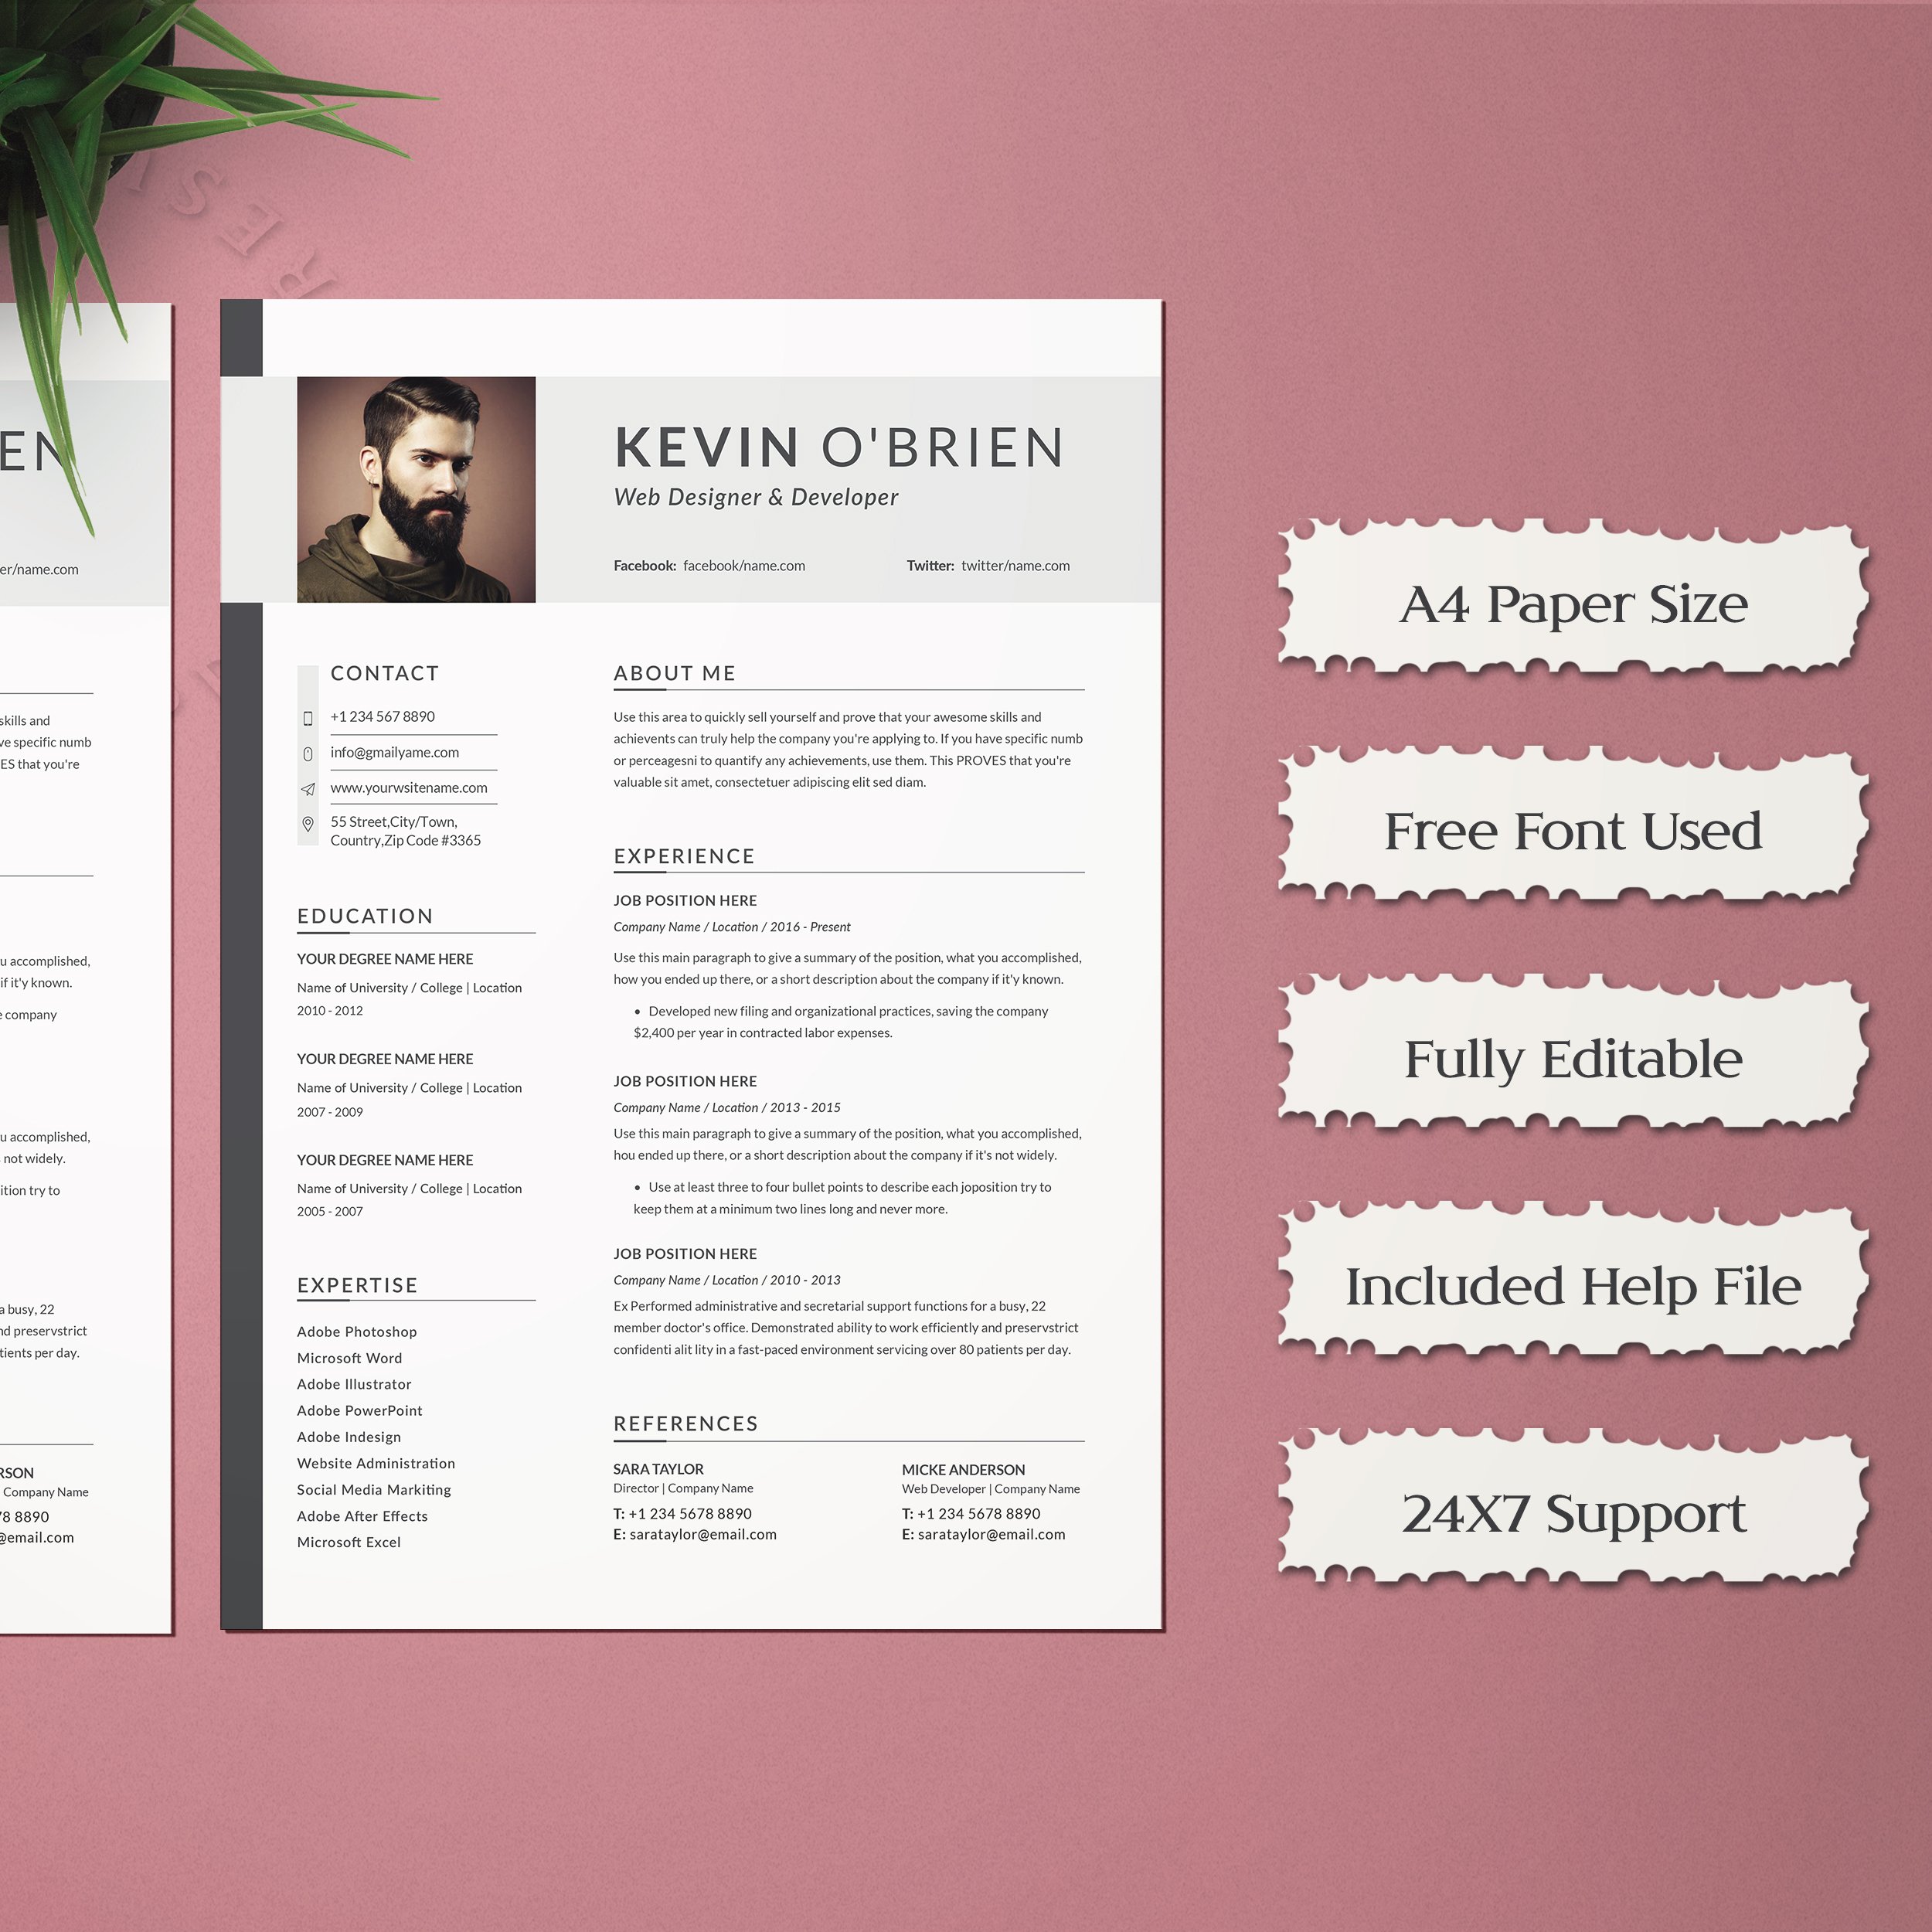 Professional resume is displayed on a pink background.